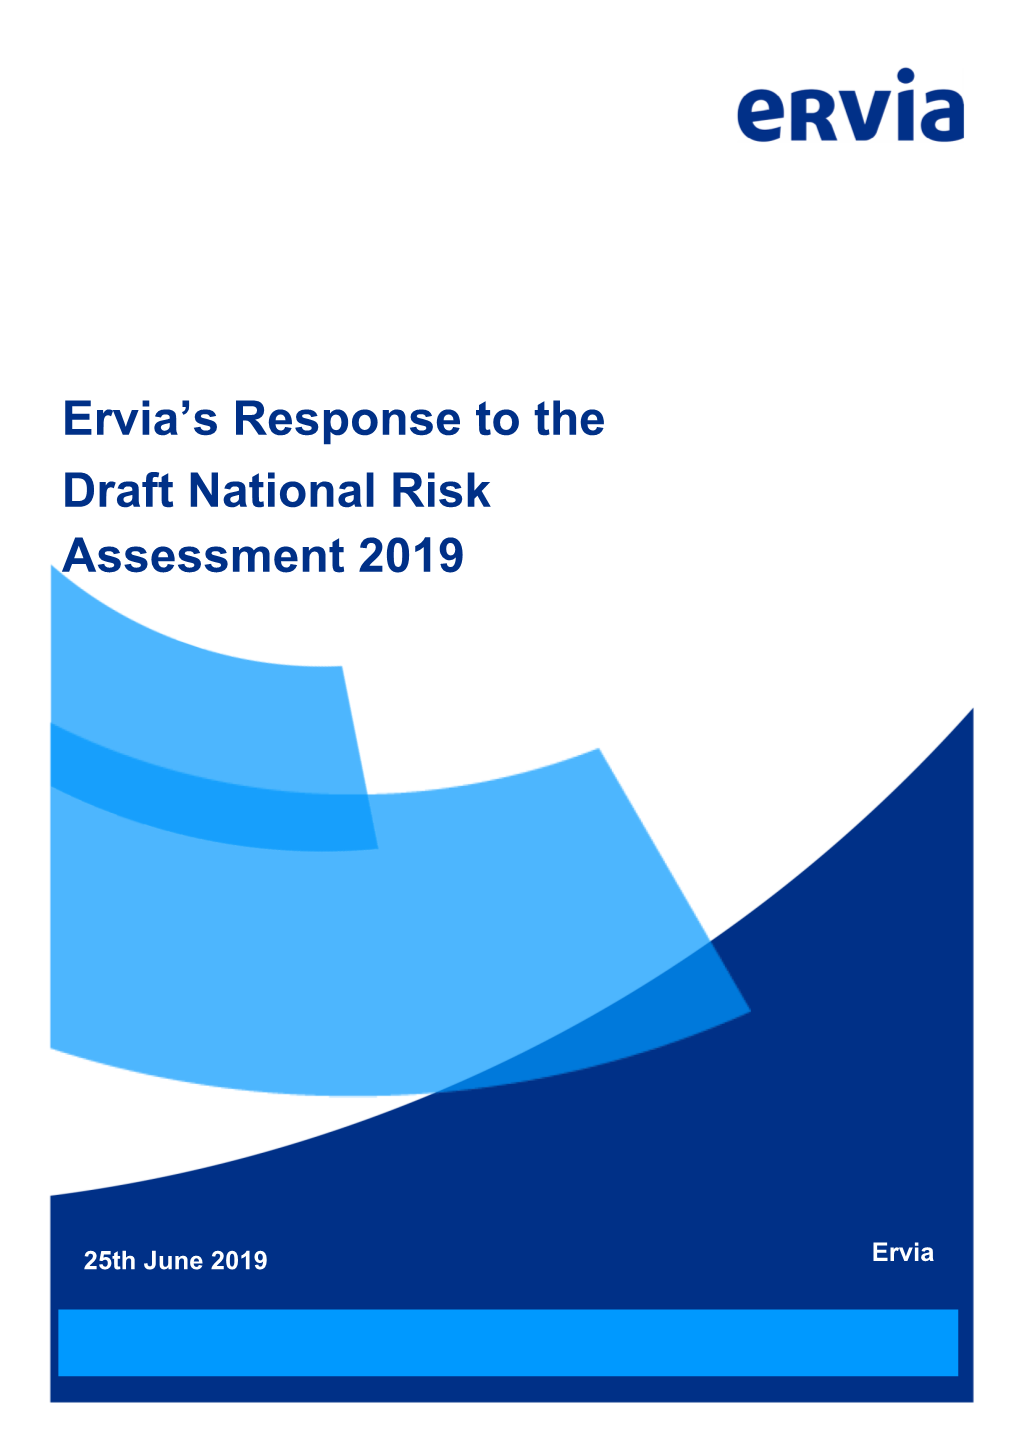 Ervia's Response to the Draft National Risk Assessment 2019